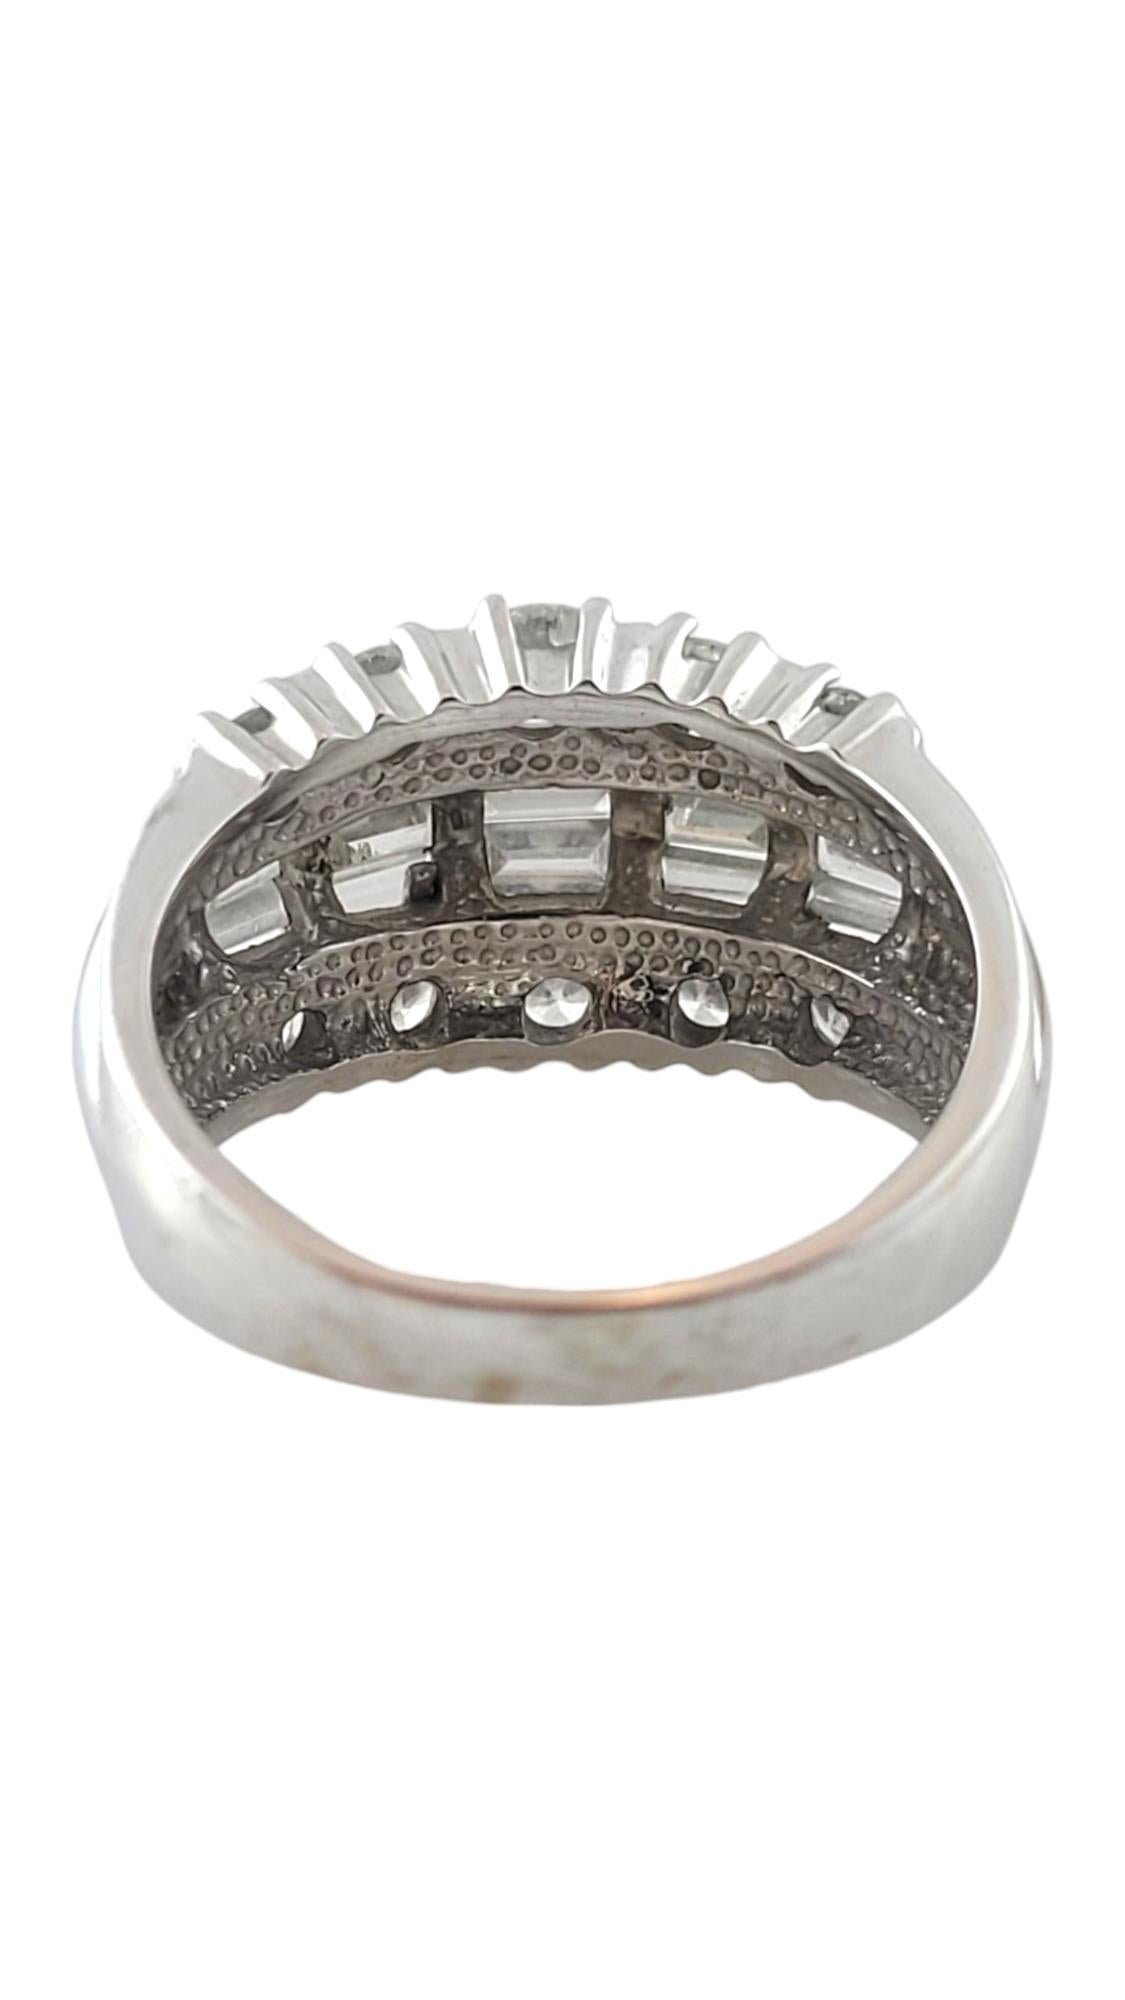 14 Karat White Gold and Diamond Band Ring Size 7 #16987 In Good Condition For Sale In Washington Depot, CT